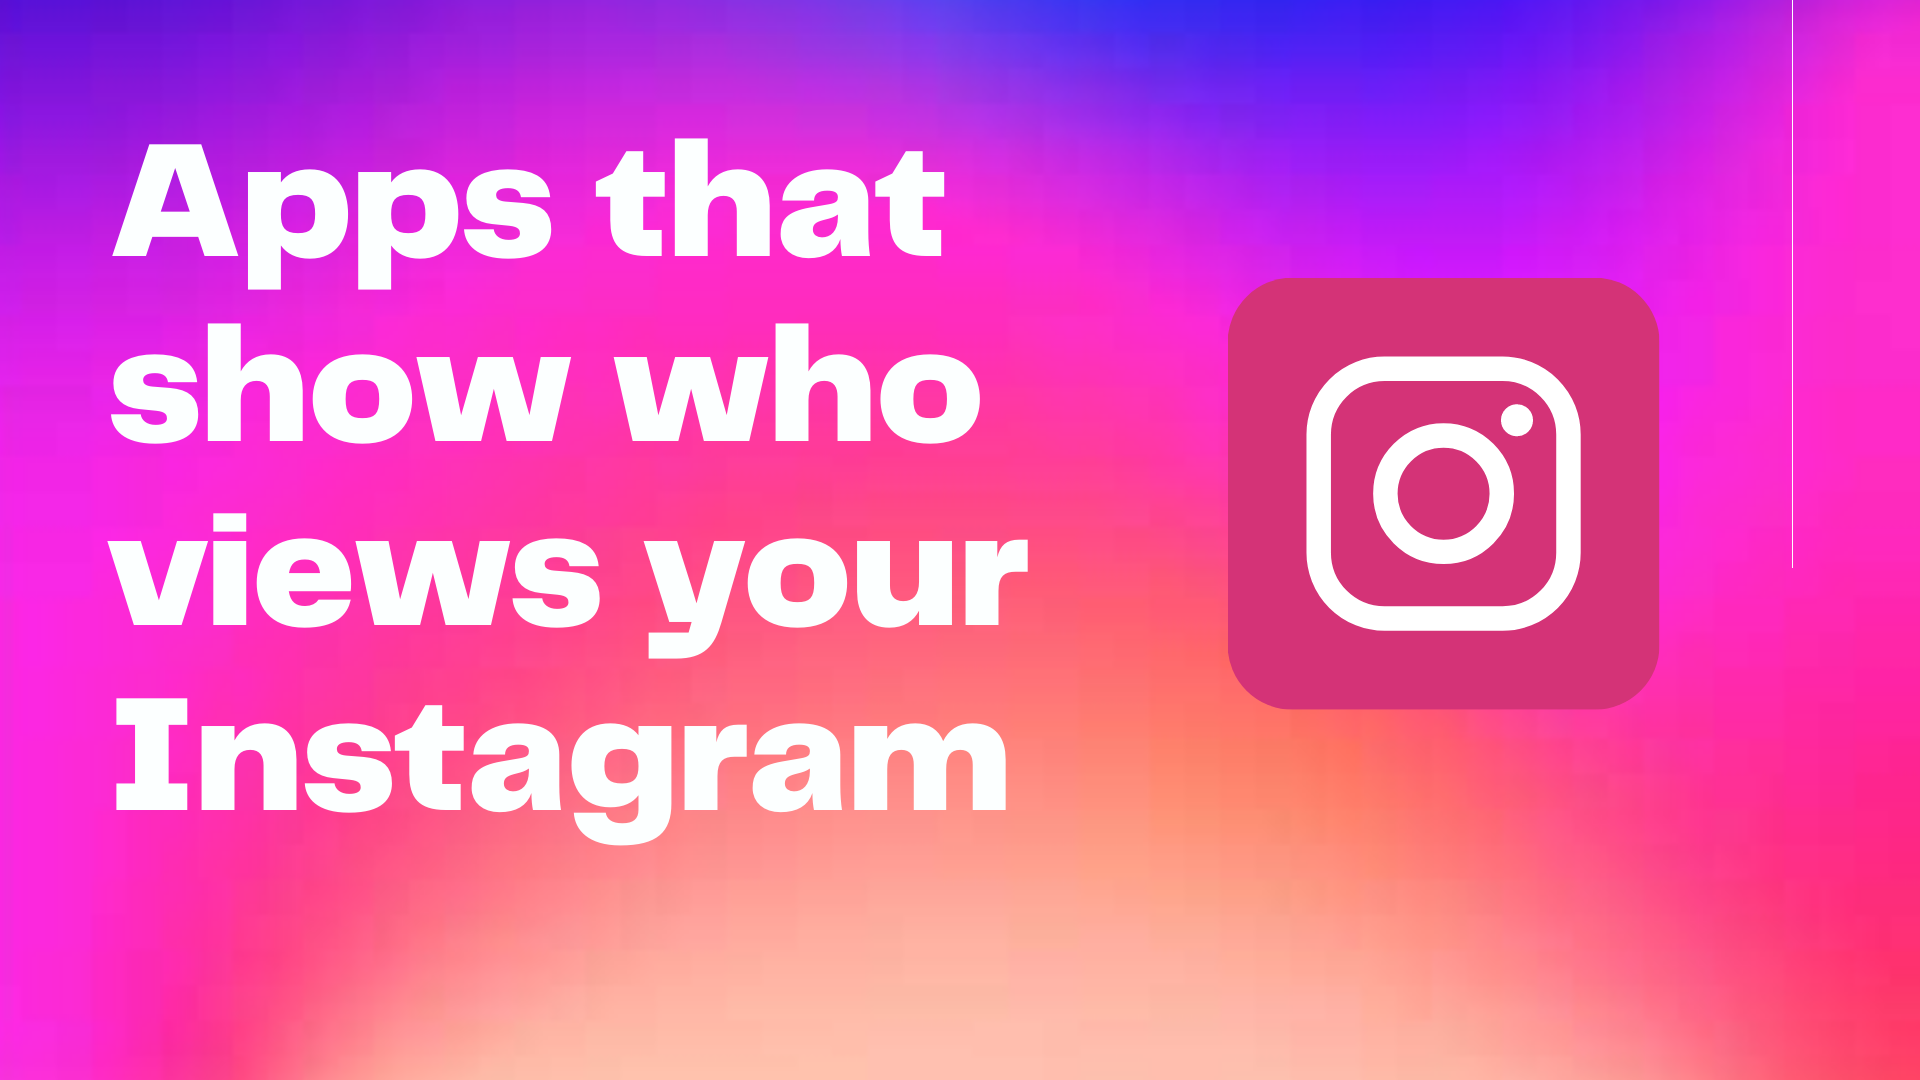 Apps that show who views your Instagram